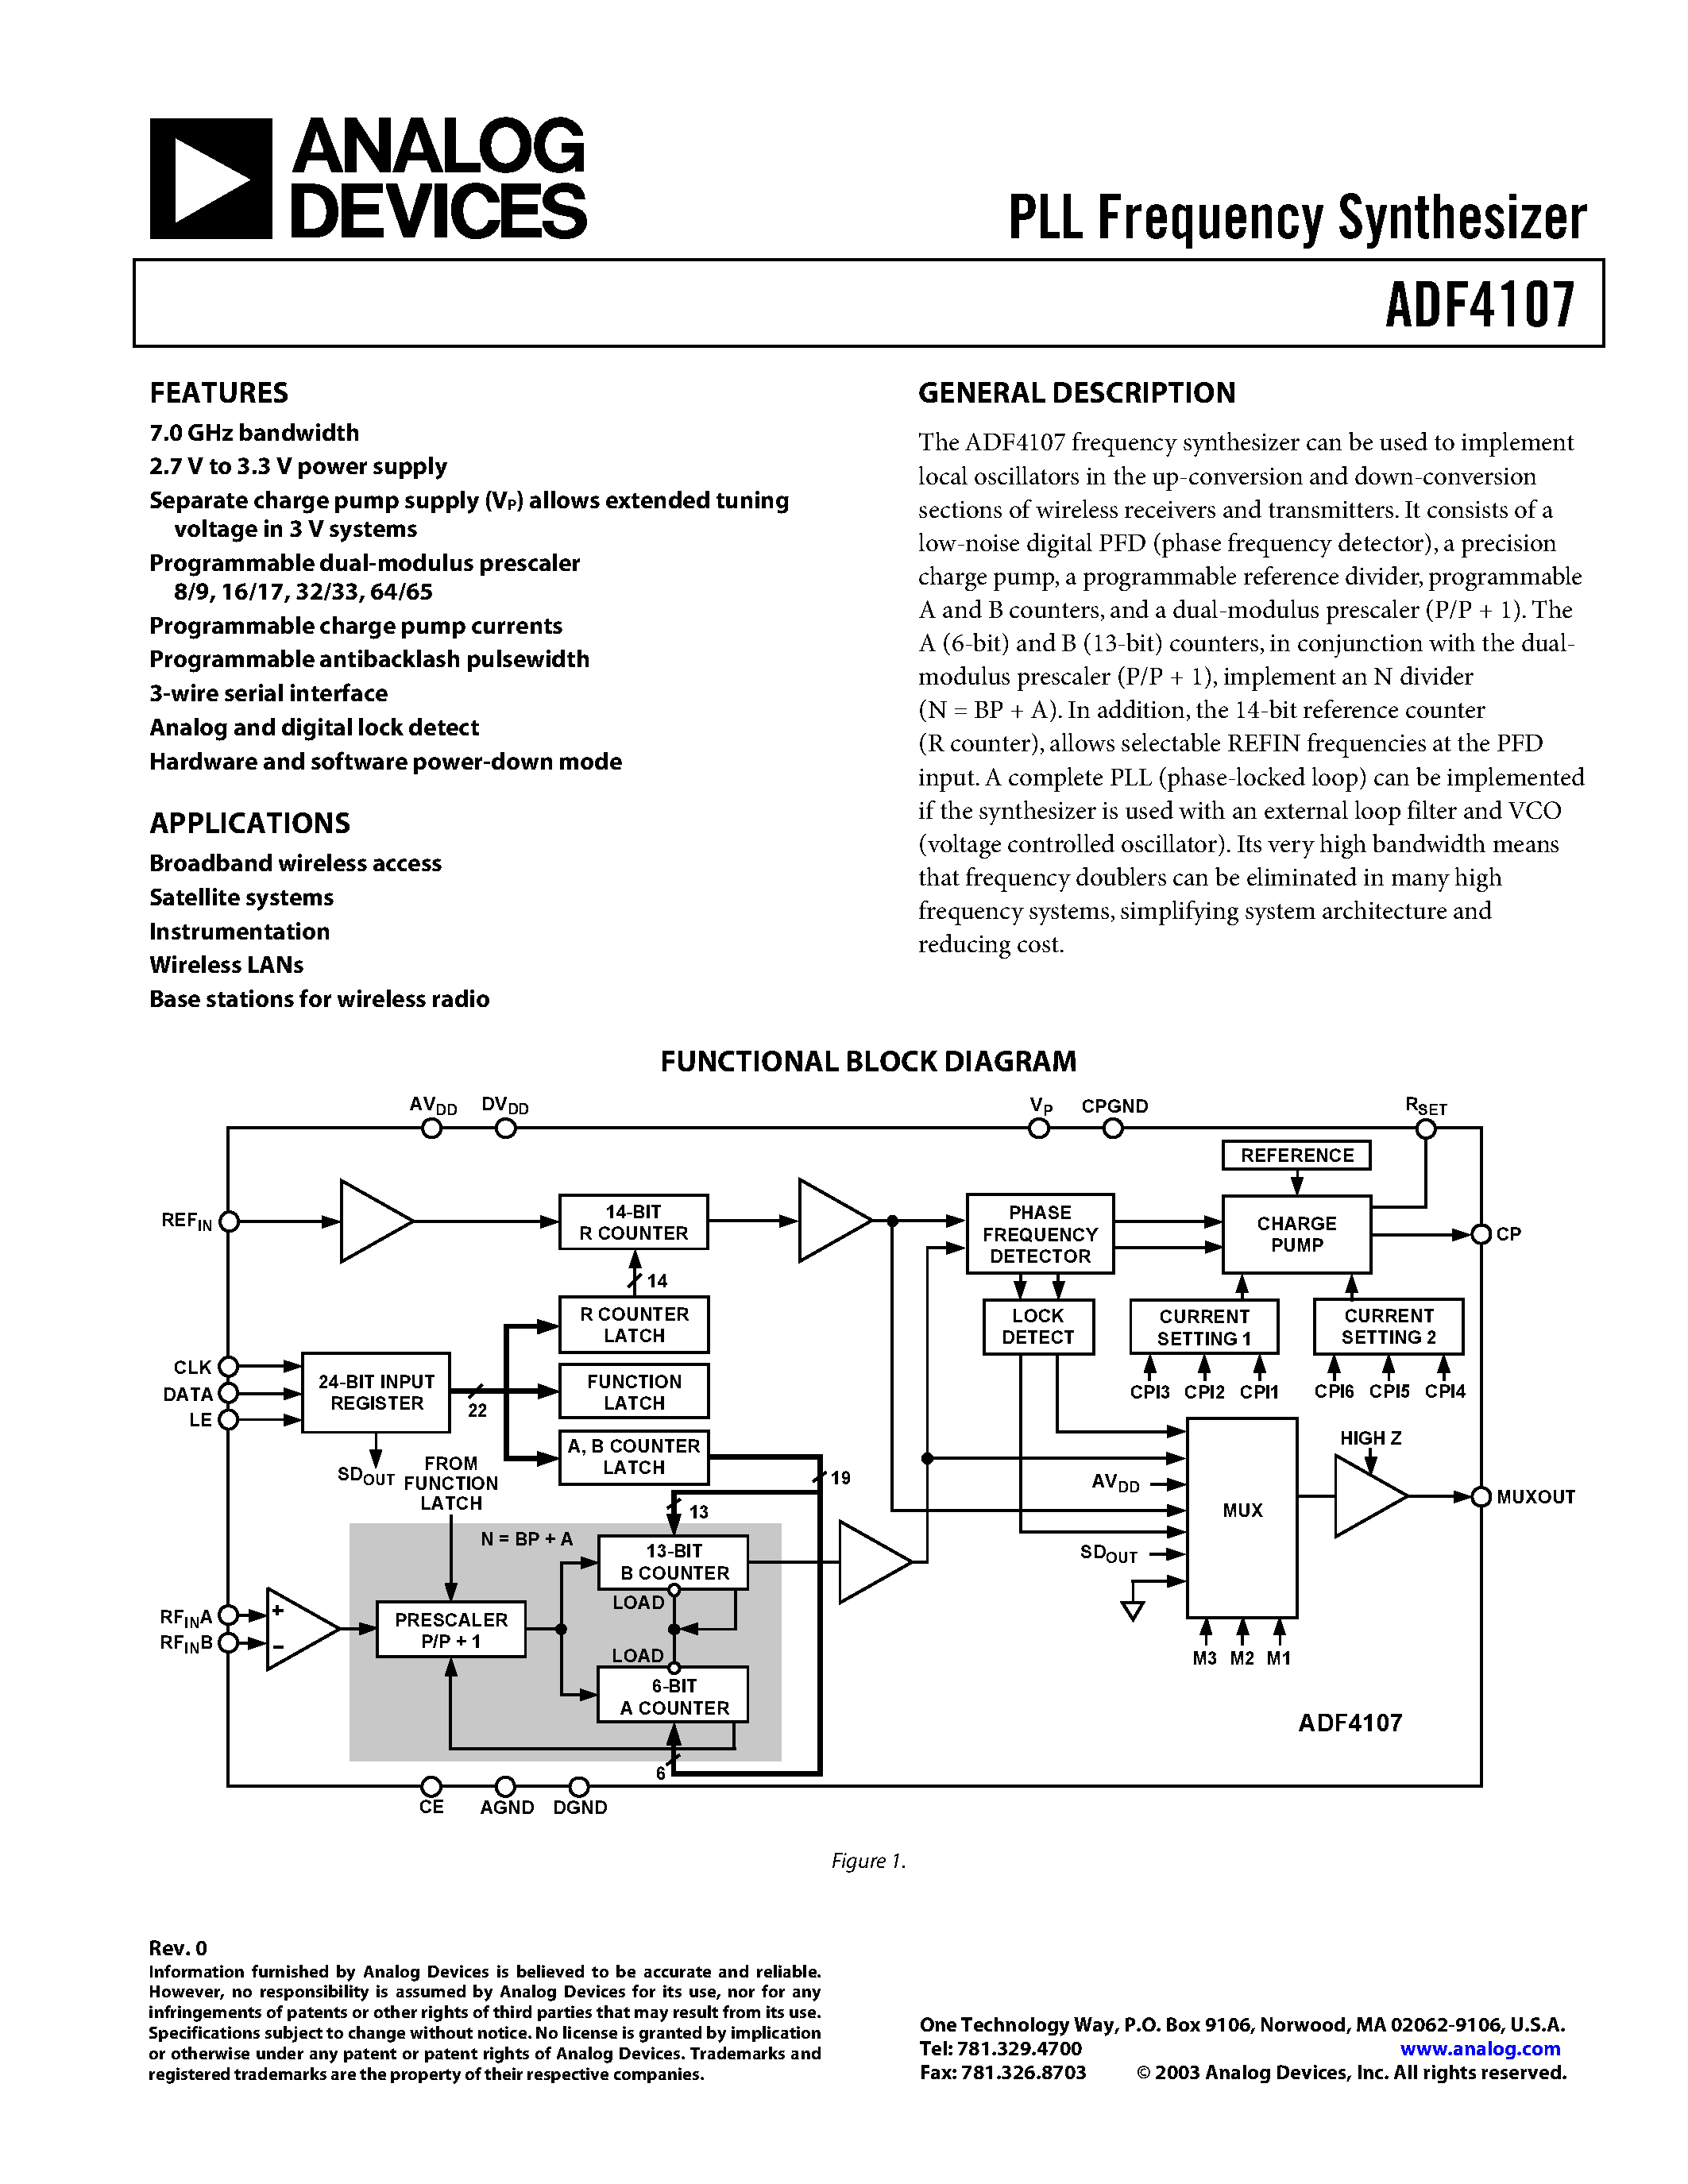 Даташит ADF4107-PLL Frequency Synthesizer страница 1